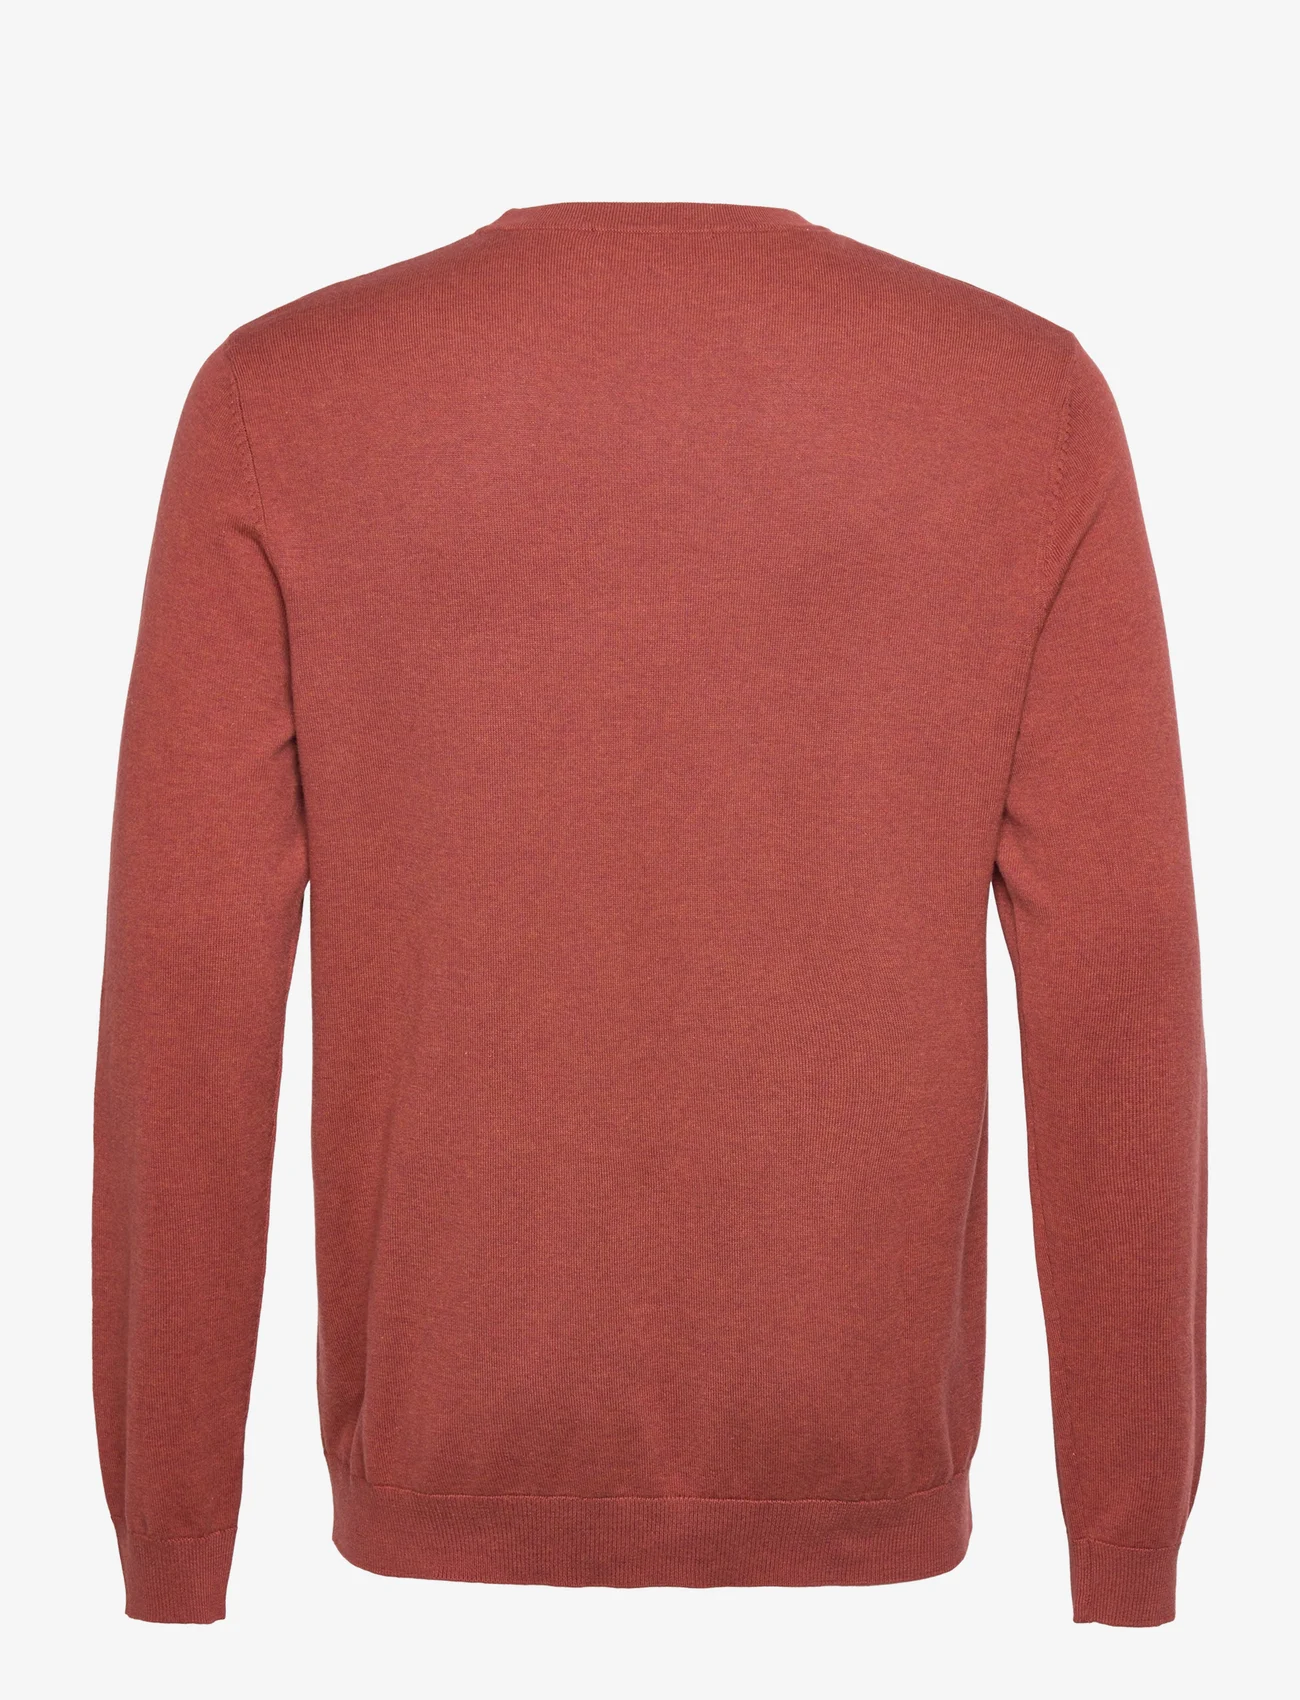 Selected Homme - SLHBERG CREW NECK NOOS - basic knitwear - burnt henna - 1